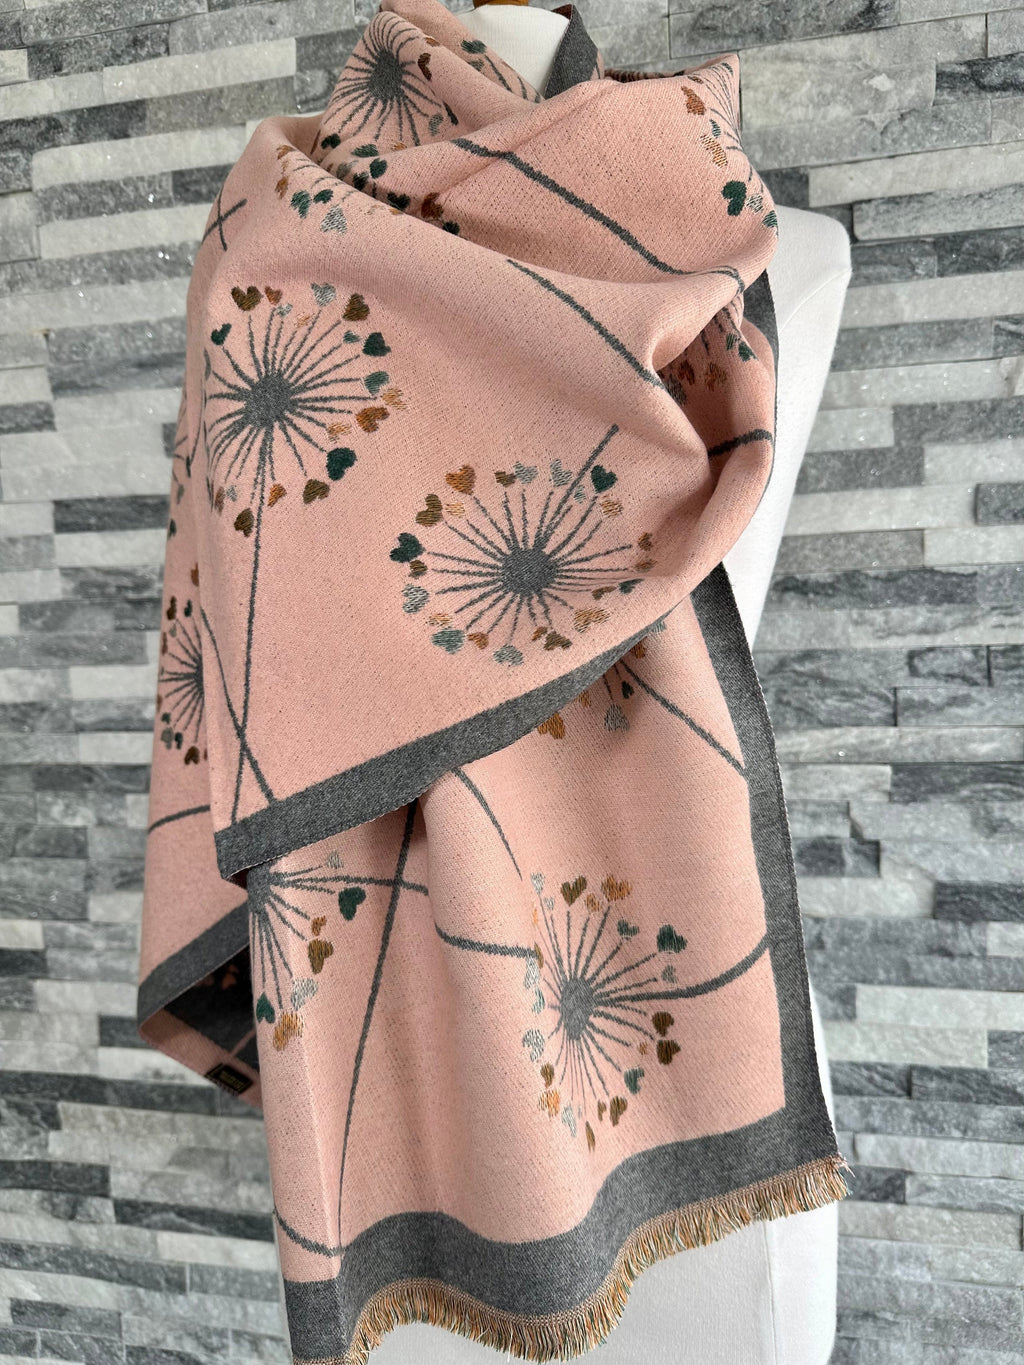 lusciousscarves Scarves & Shawls Pale Pink and Grey Reversible Dandelions Scarf Wrap.